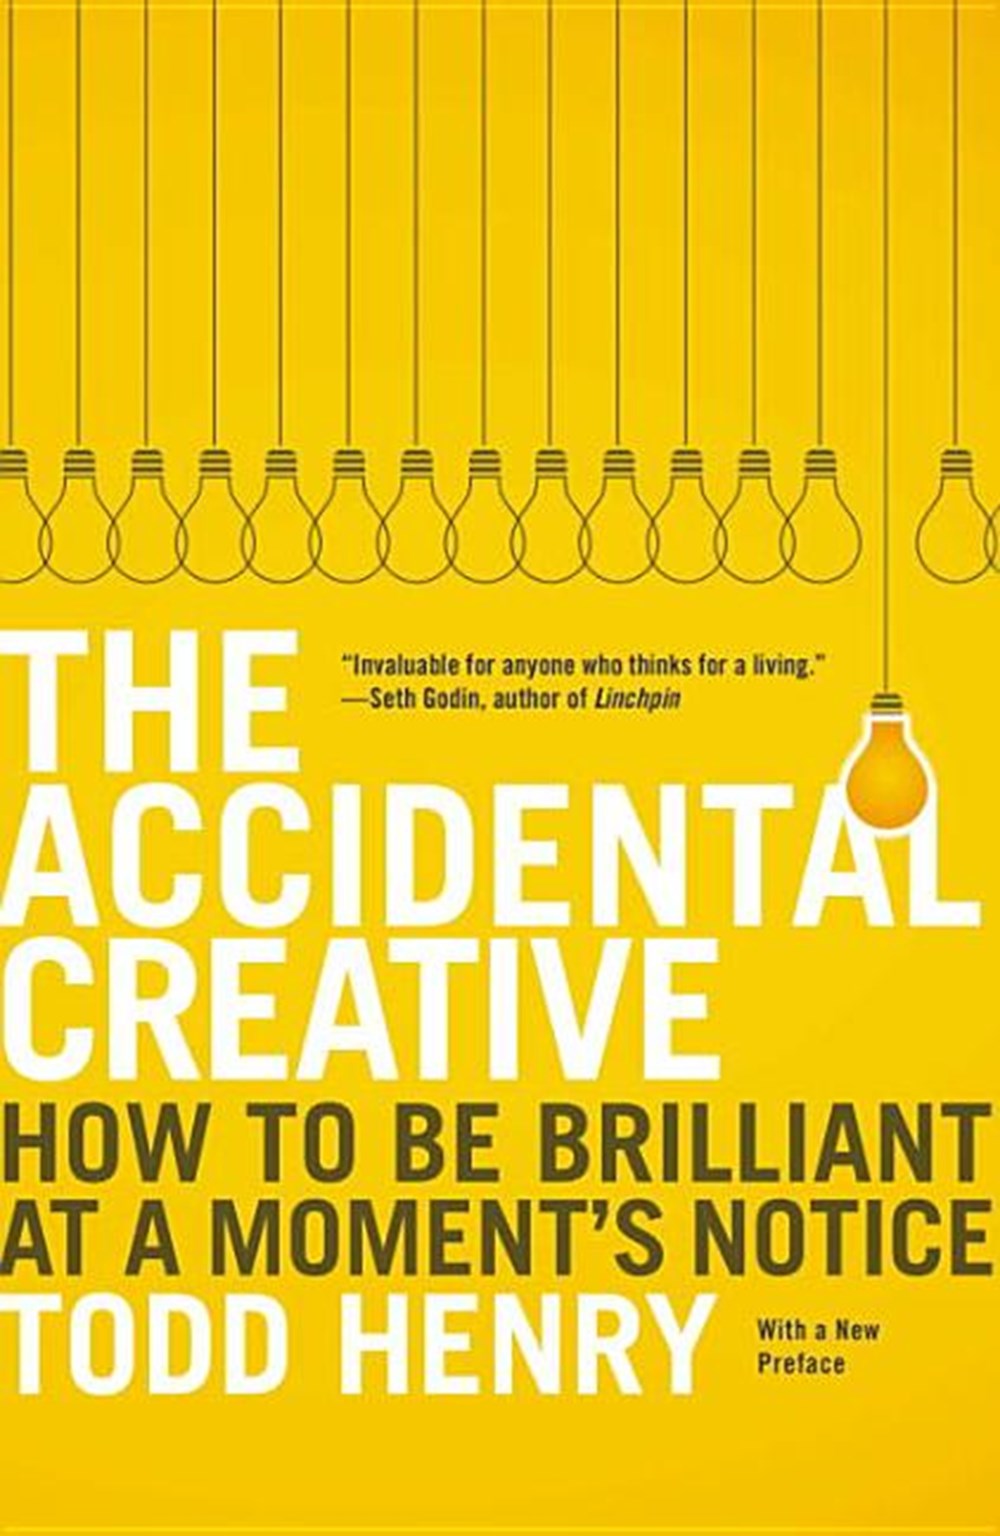 Accidental Creative How to Be Brilliant at a Moment's Notice